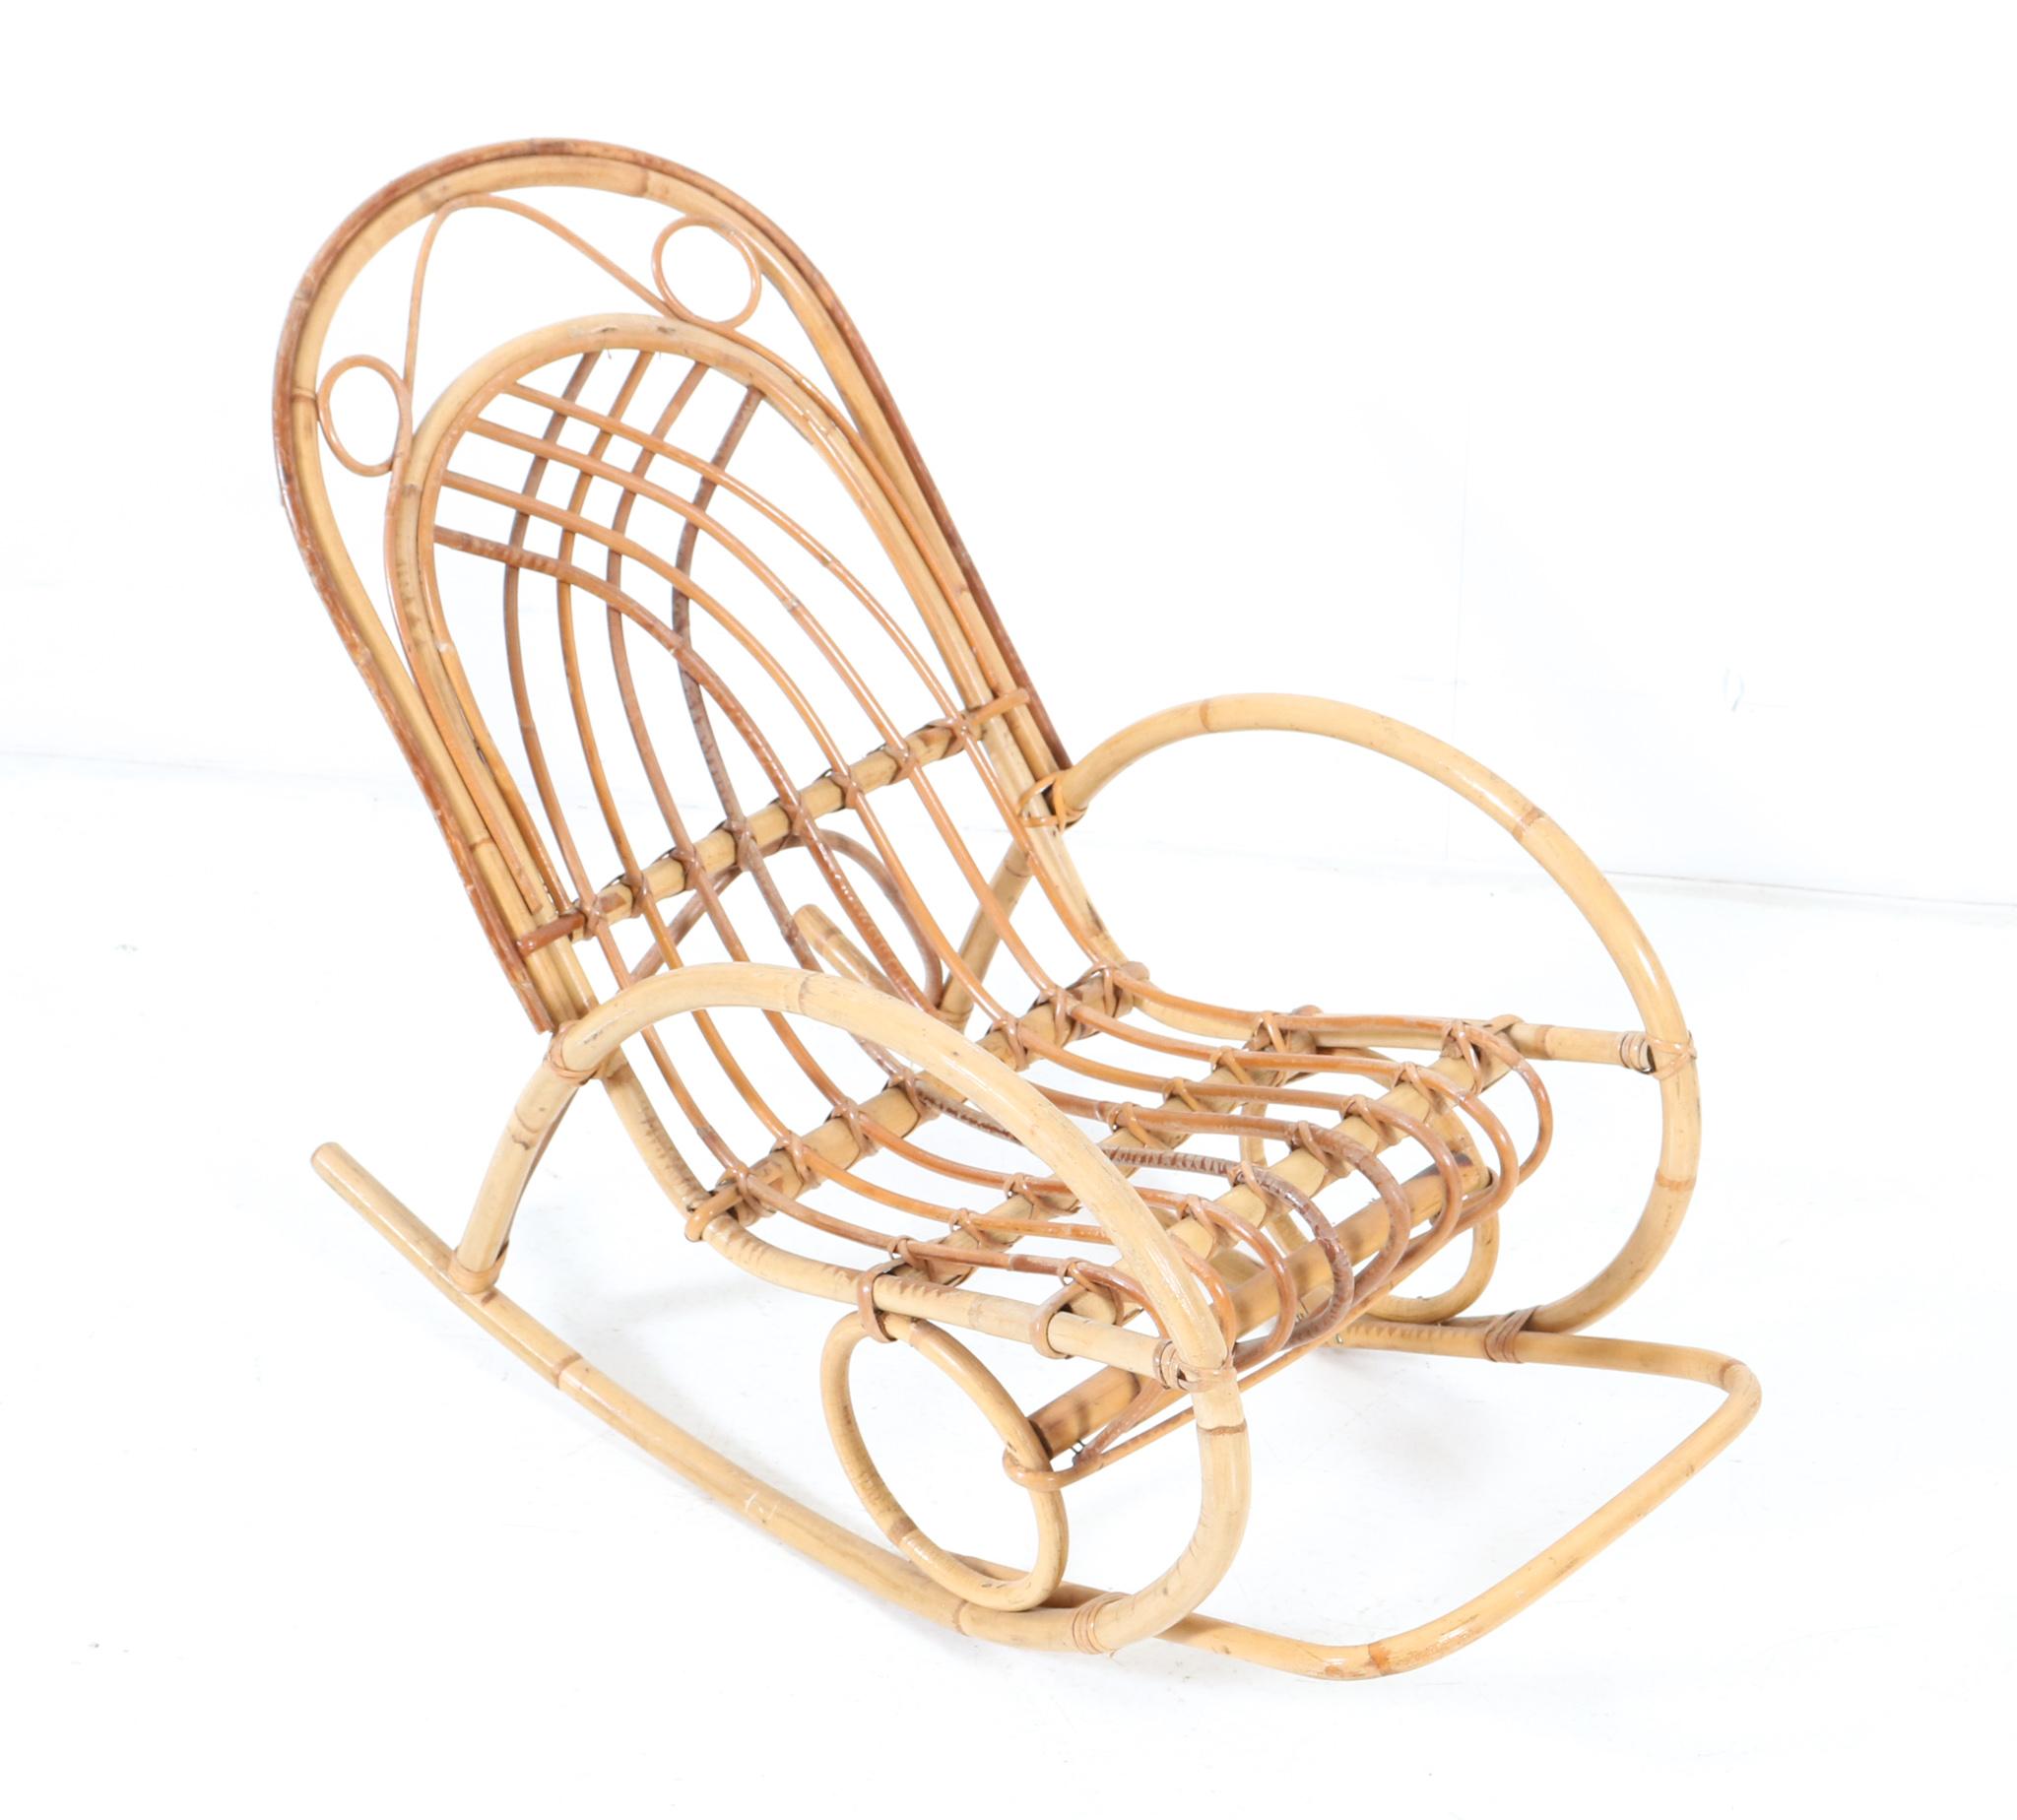 Bamboo and Rattan Mid-Century Modern Children's Rocking Chair, 1970s In Good Condition For Sale In Amsterdam, NL